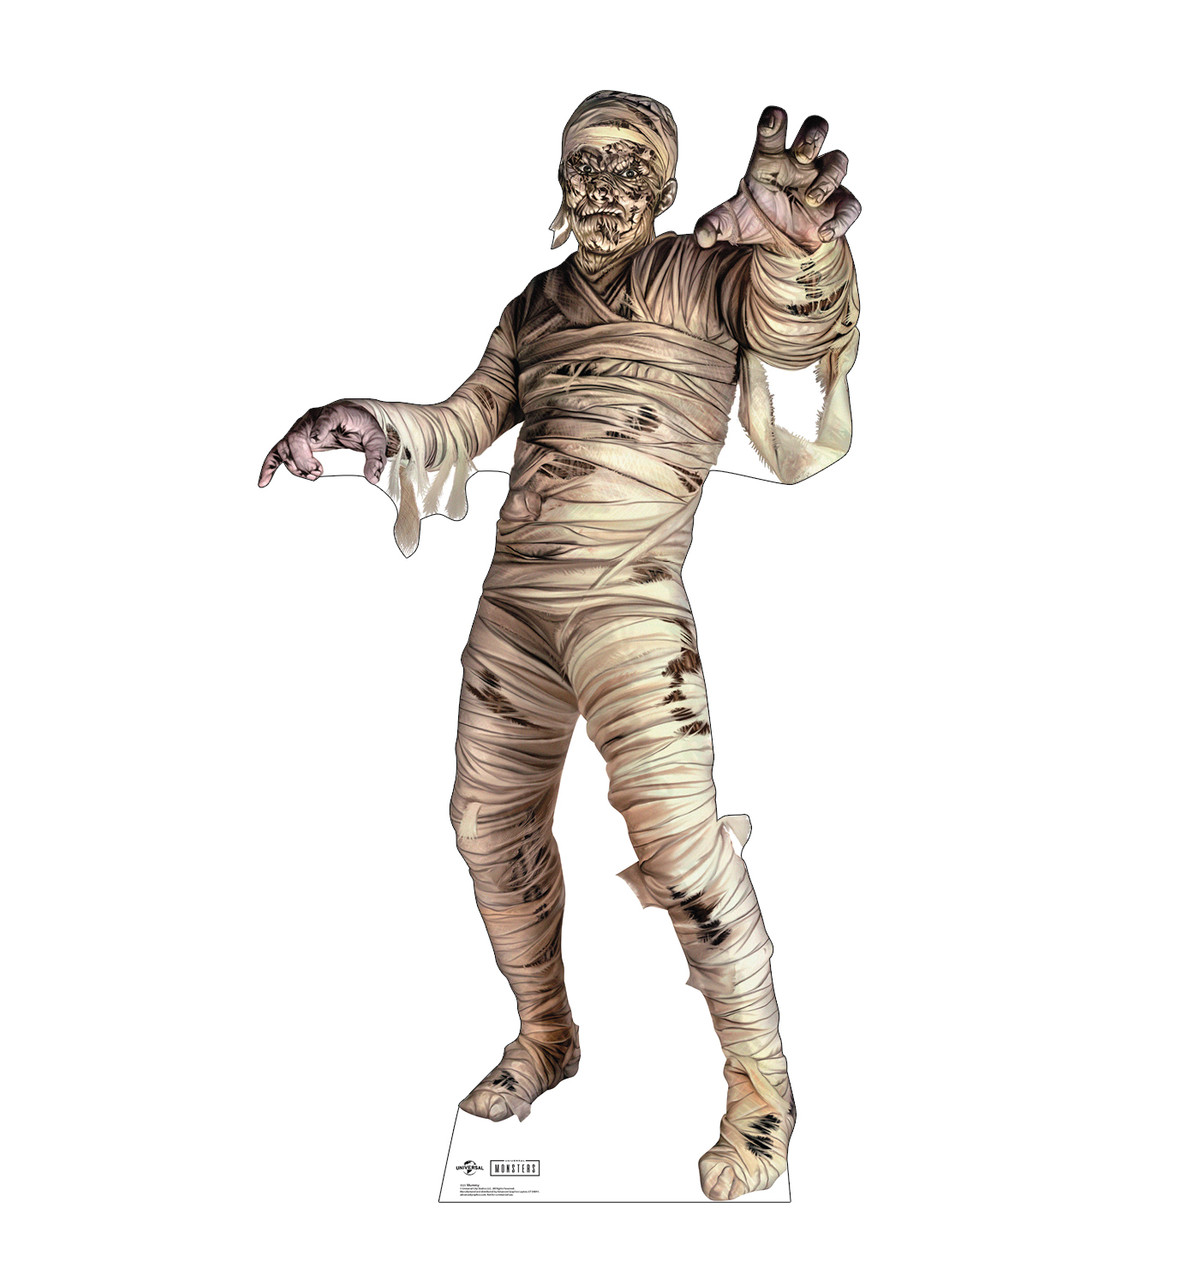 Life-size cardboard standee of Mummy from Universals Monsters Collections.